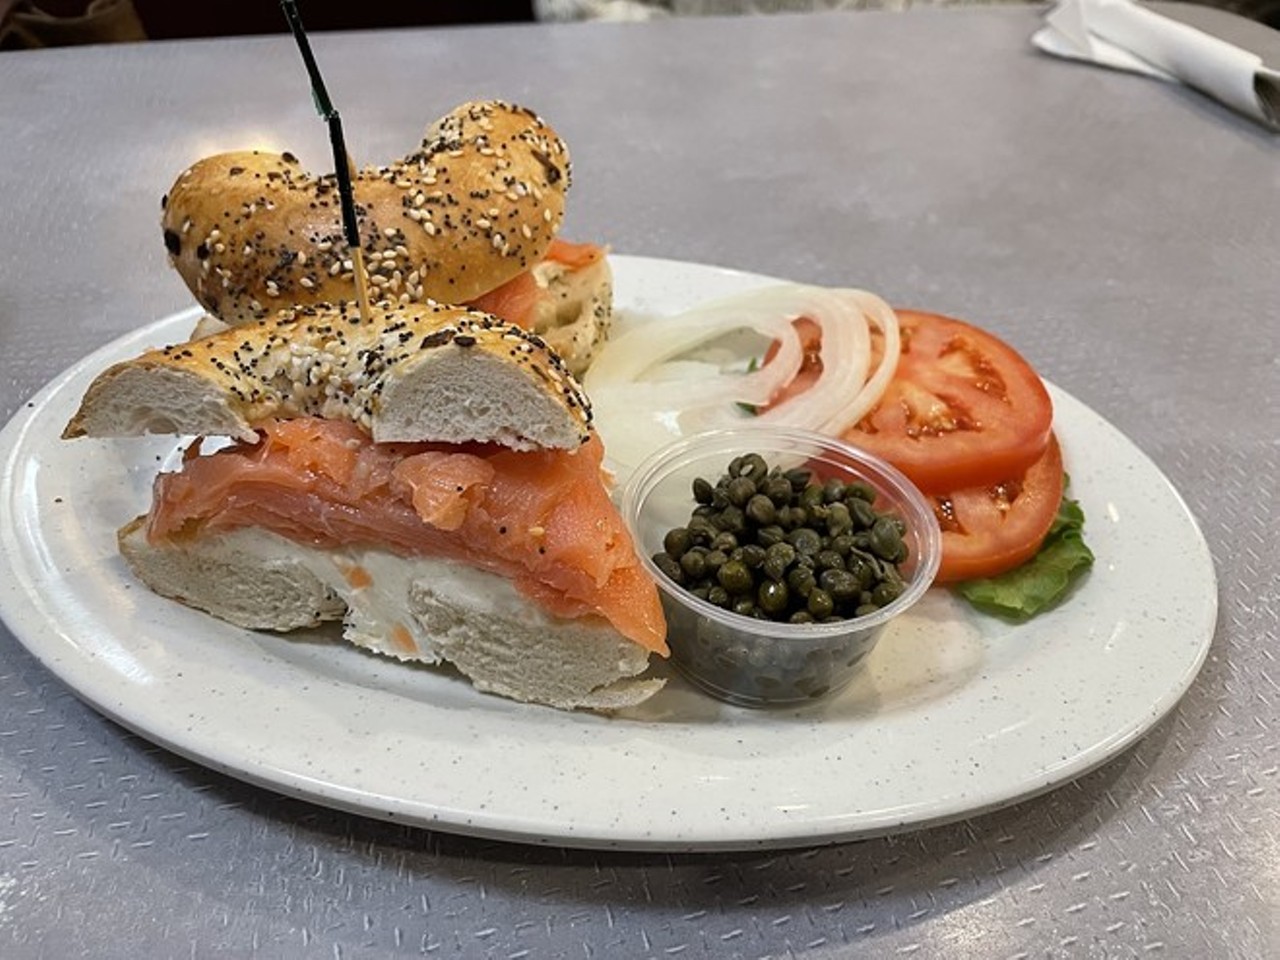 Lox, Onions and Eggs at Corky & Lenny’s
Corky & Lenny’s , 27091 Chagrin Blvd., Woodmere, 216-464-3838, corkyandlennys.com
Dining at Corky and Lenny’s was like visiting an old friend. The Jewish deli had been chugging along since 1956, when it opened at Cedar Center. The most recent location at Village Square in Woodmere had been in business for 50 years. We lost founder Lenny Kaden earlier this year, and we lost the institution at the end of the year as Cleveland said goodbye to a 67-year institution.